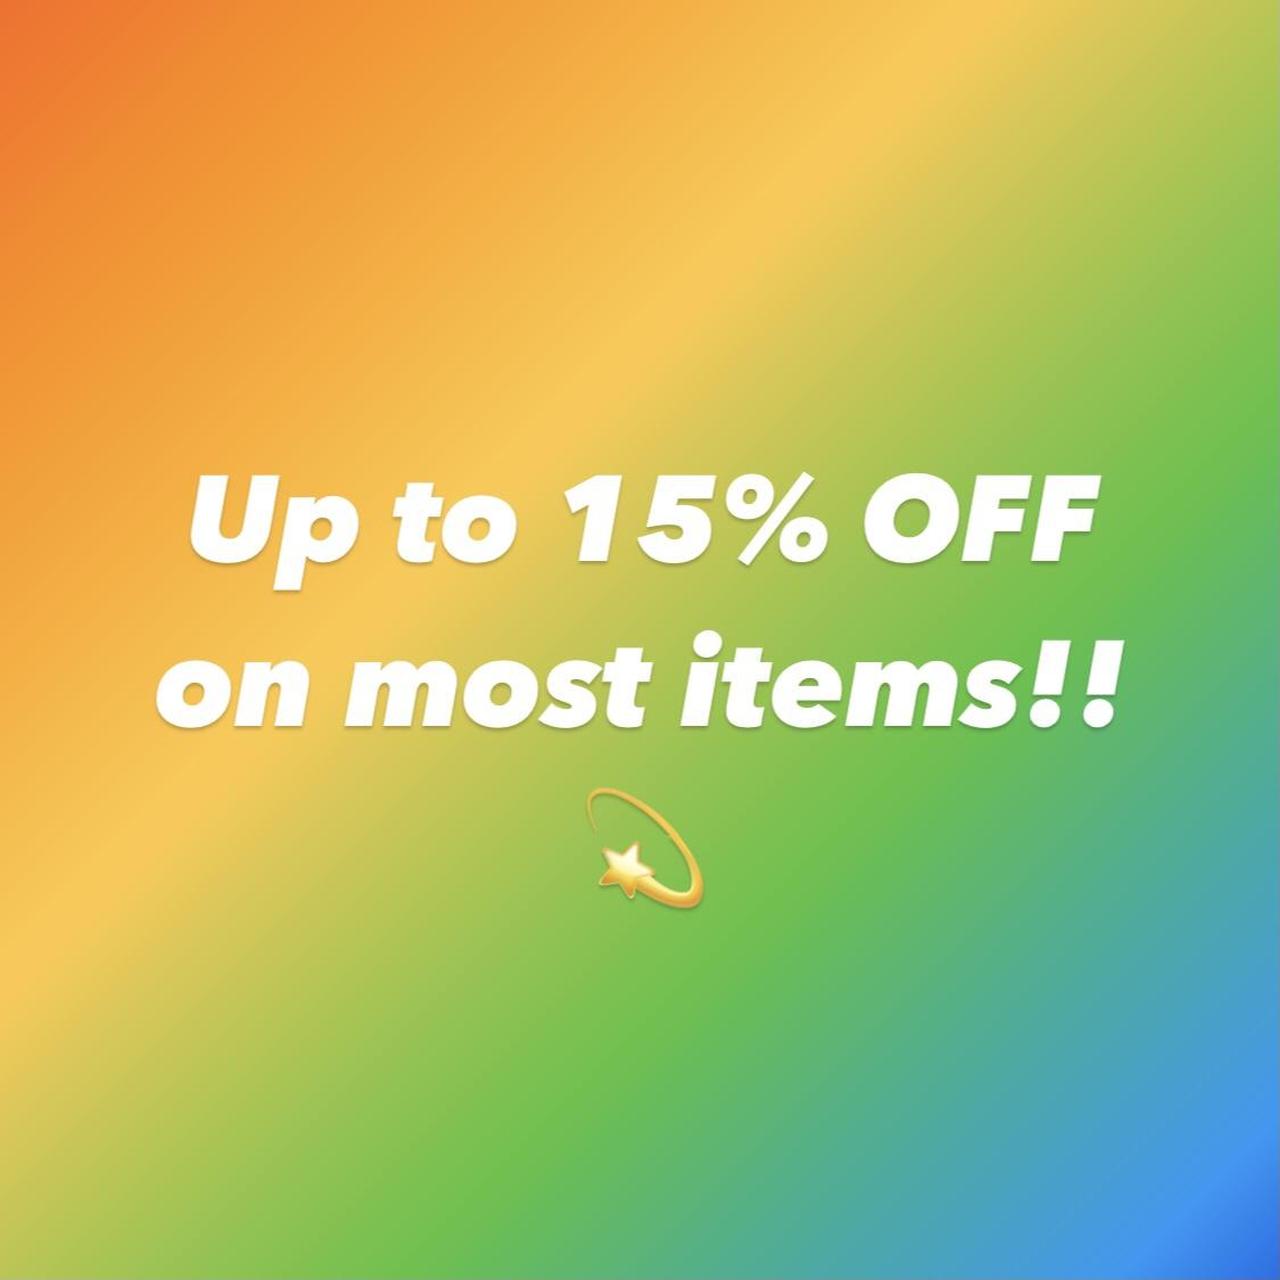 enjoy-up-to-15-off-on-most-items-for-a-limited-depop